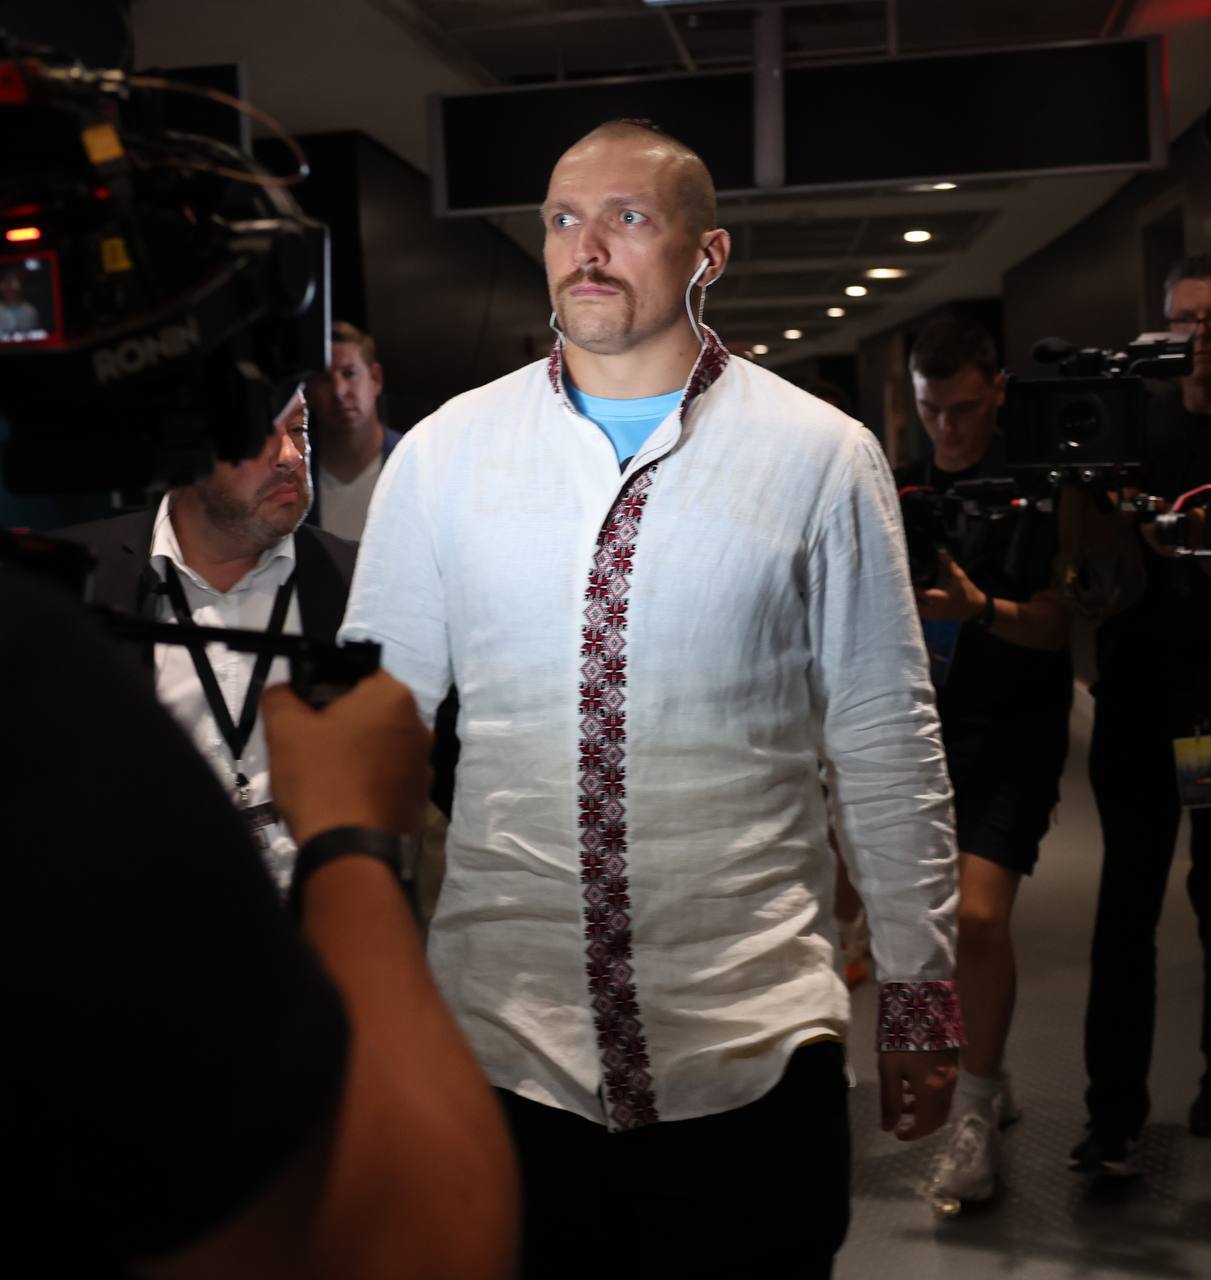 ''Starting today...'' Fury broke his silence and made a humiliating demand of Usyk. Video.